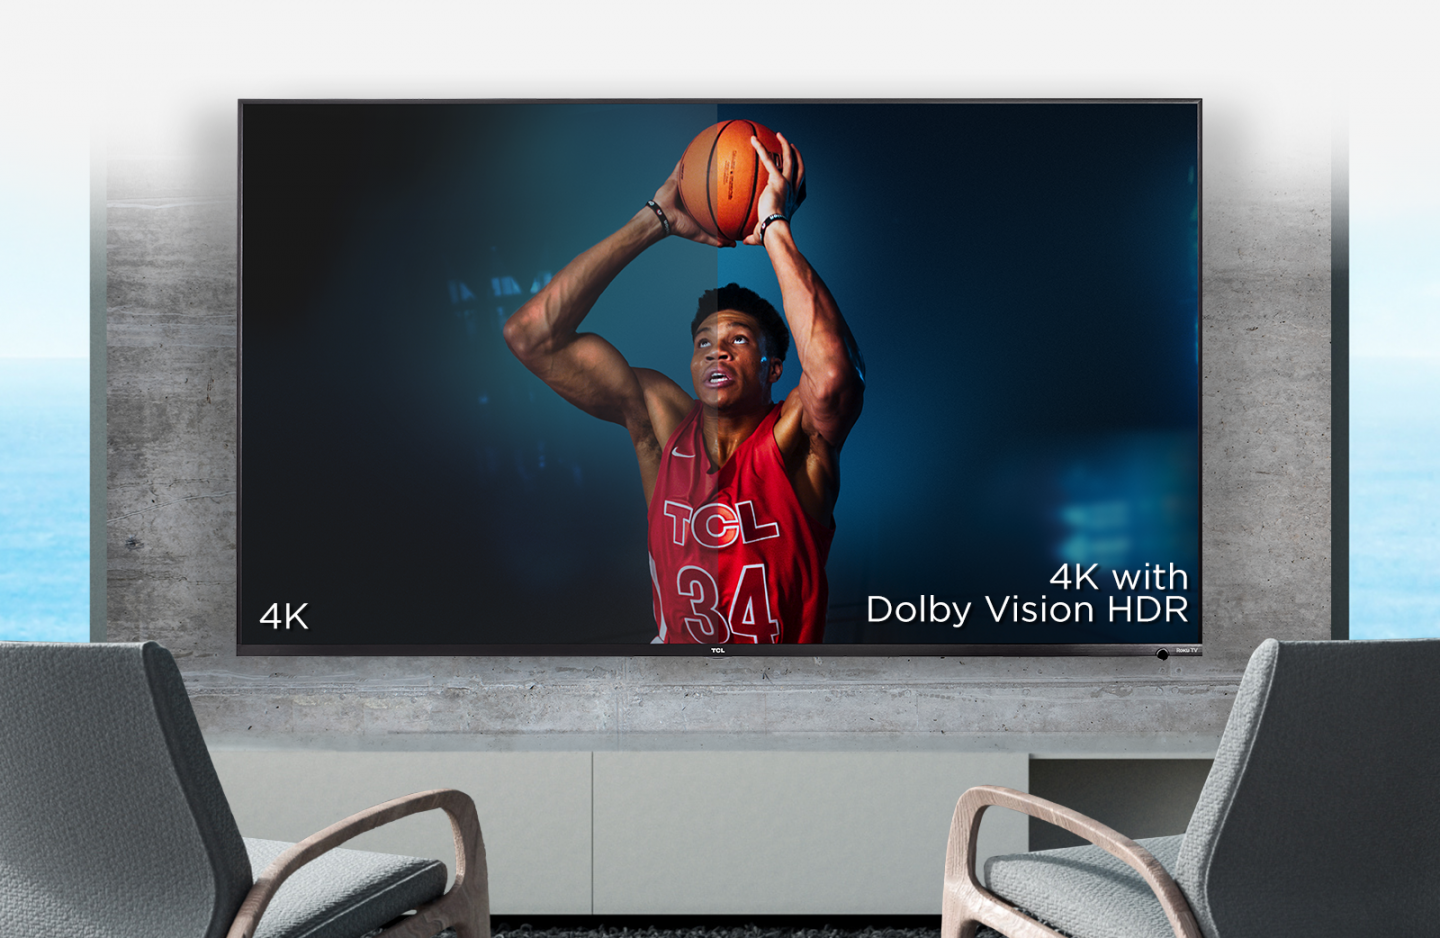 TCL 65R617 Smart LED Roku Smart TV is hung on the wall and the athlete holds the basketball high